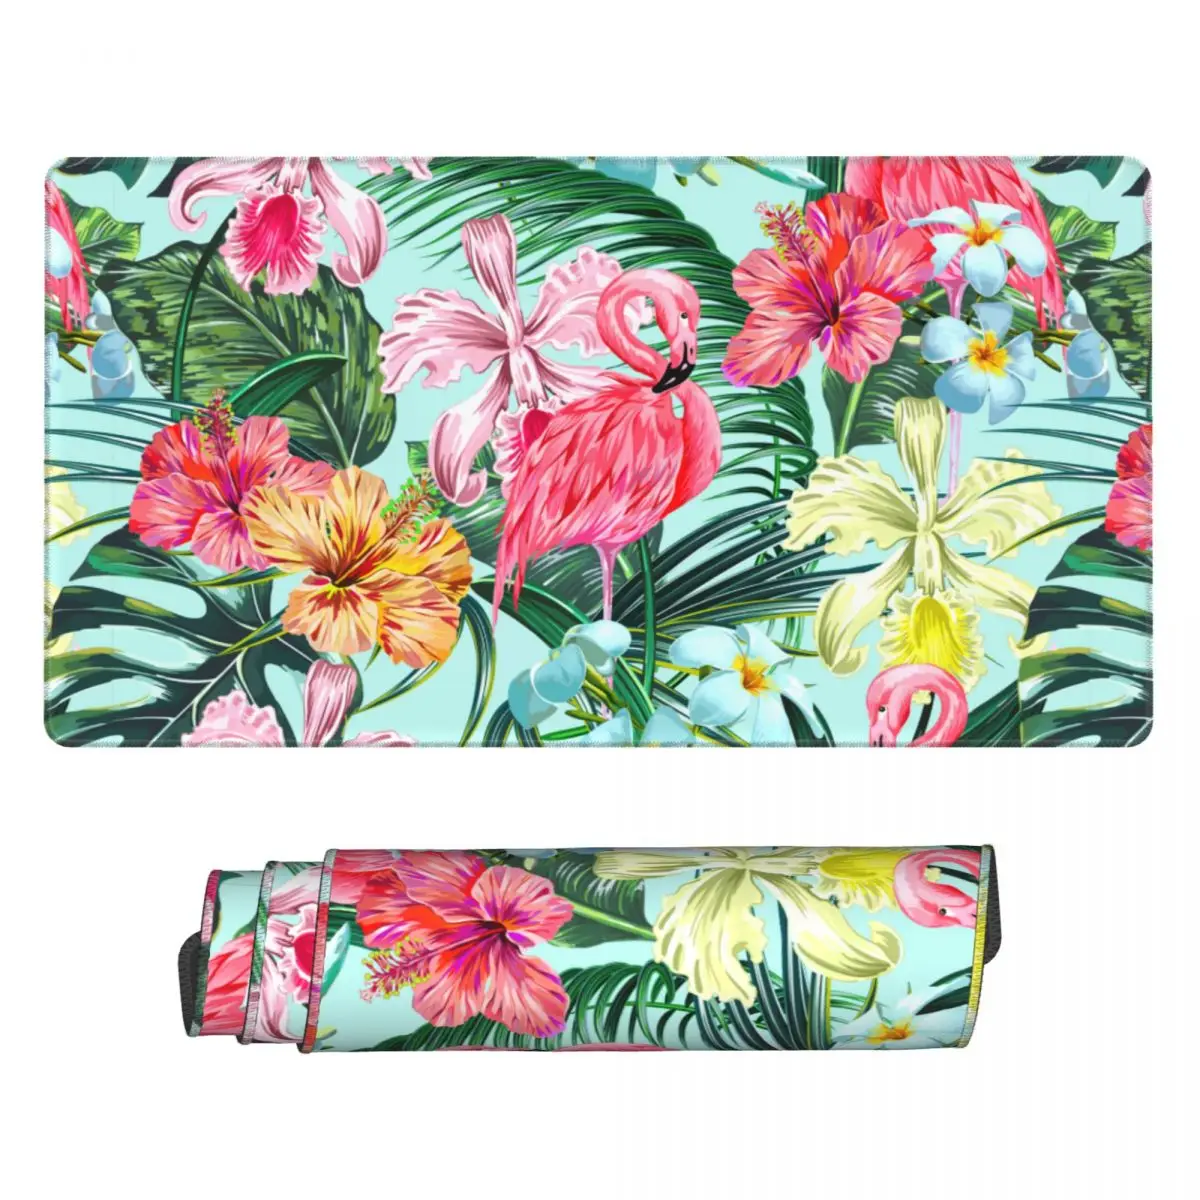 

Summer Tropical Palm Leaves Gaming Mouse Pad PC Mouse Mat Birds Large Anti-slip Natural Rubber Mousepad for Gamers